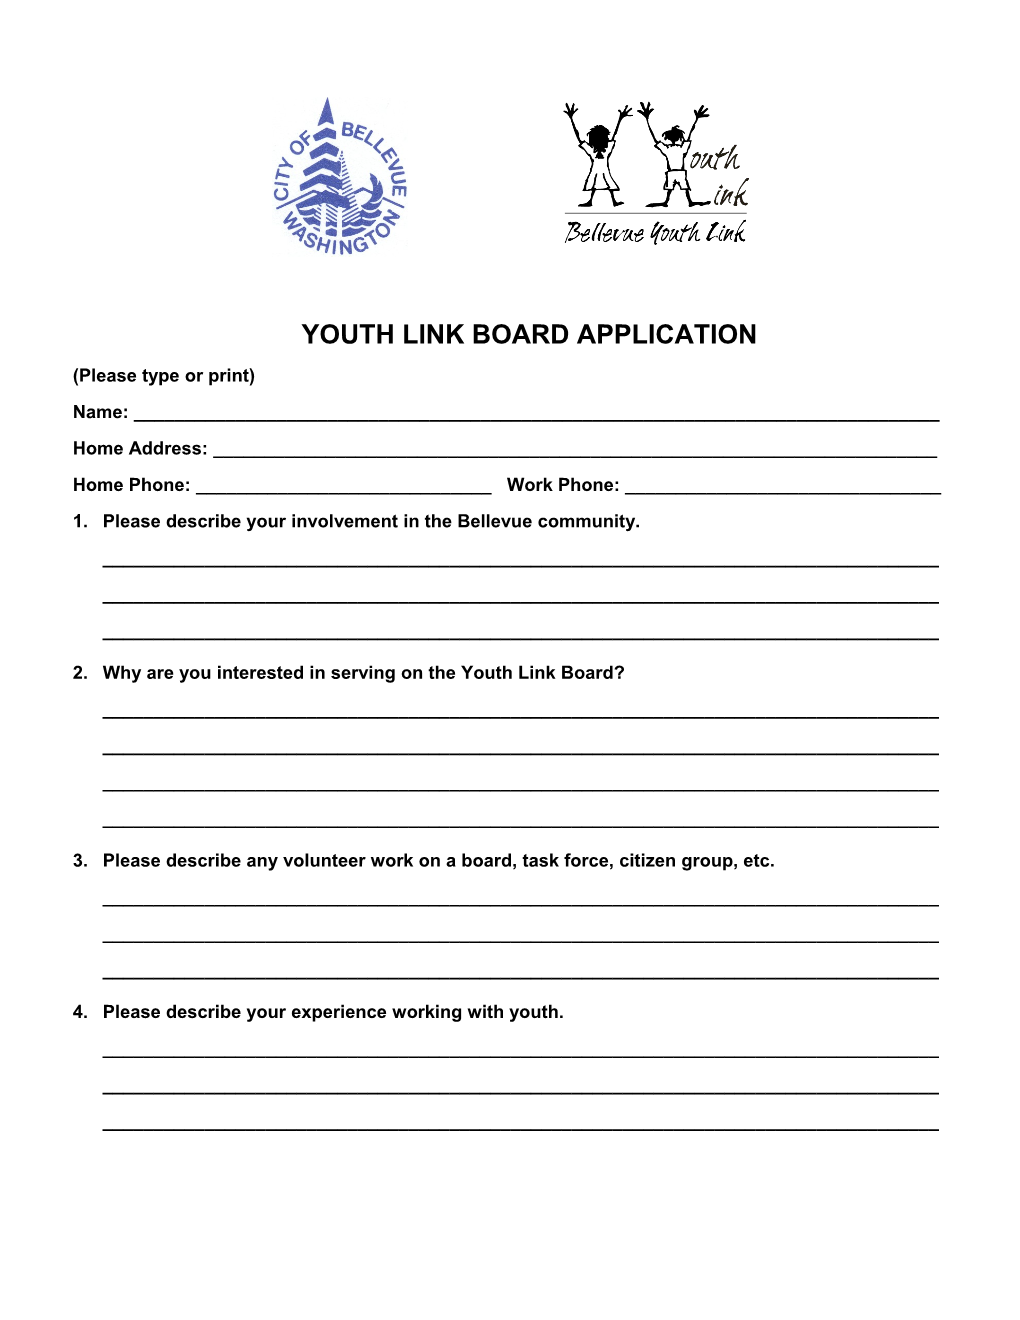 Youth Link Board Application